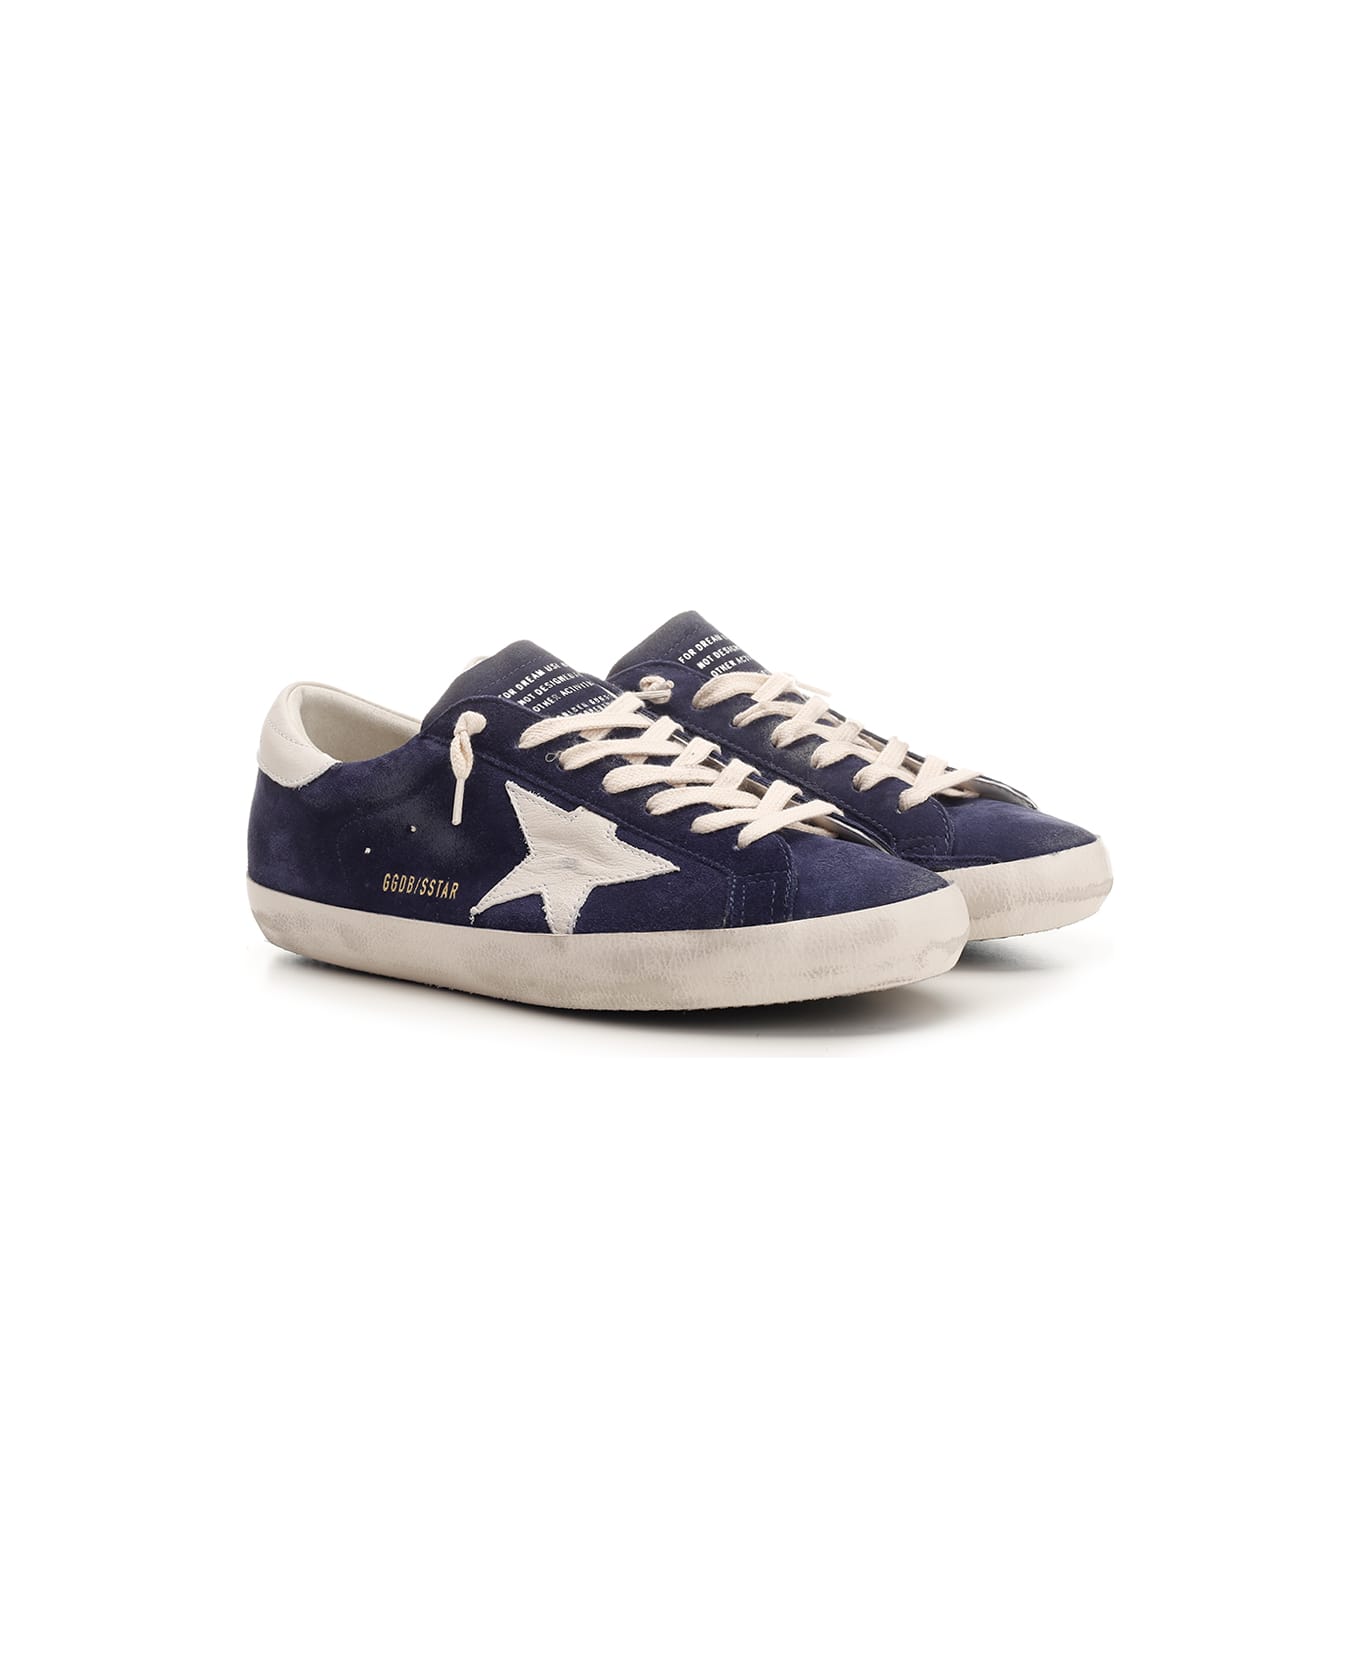 Golden Goose Super-star Classic Sneakers - BLUE/WHITE